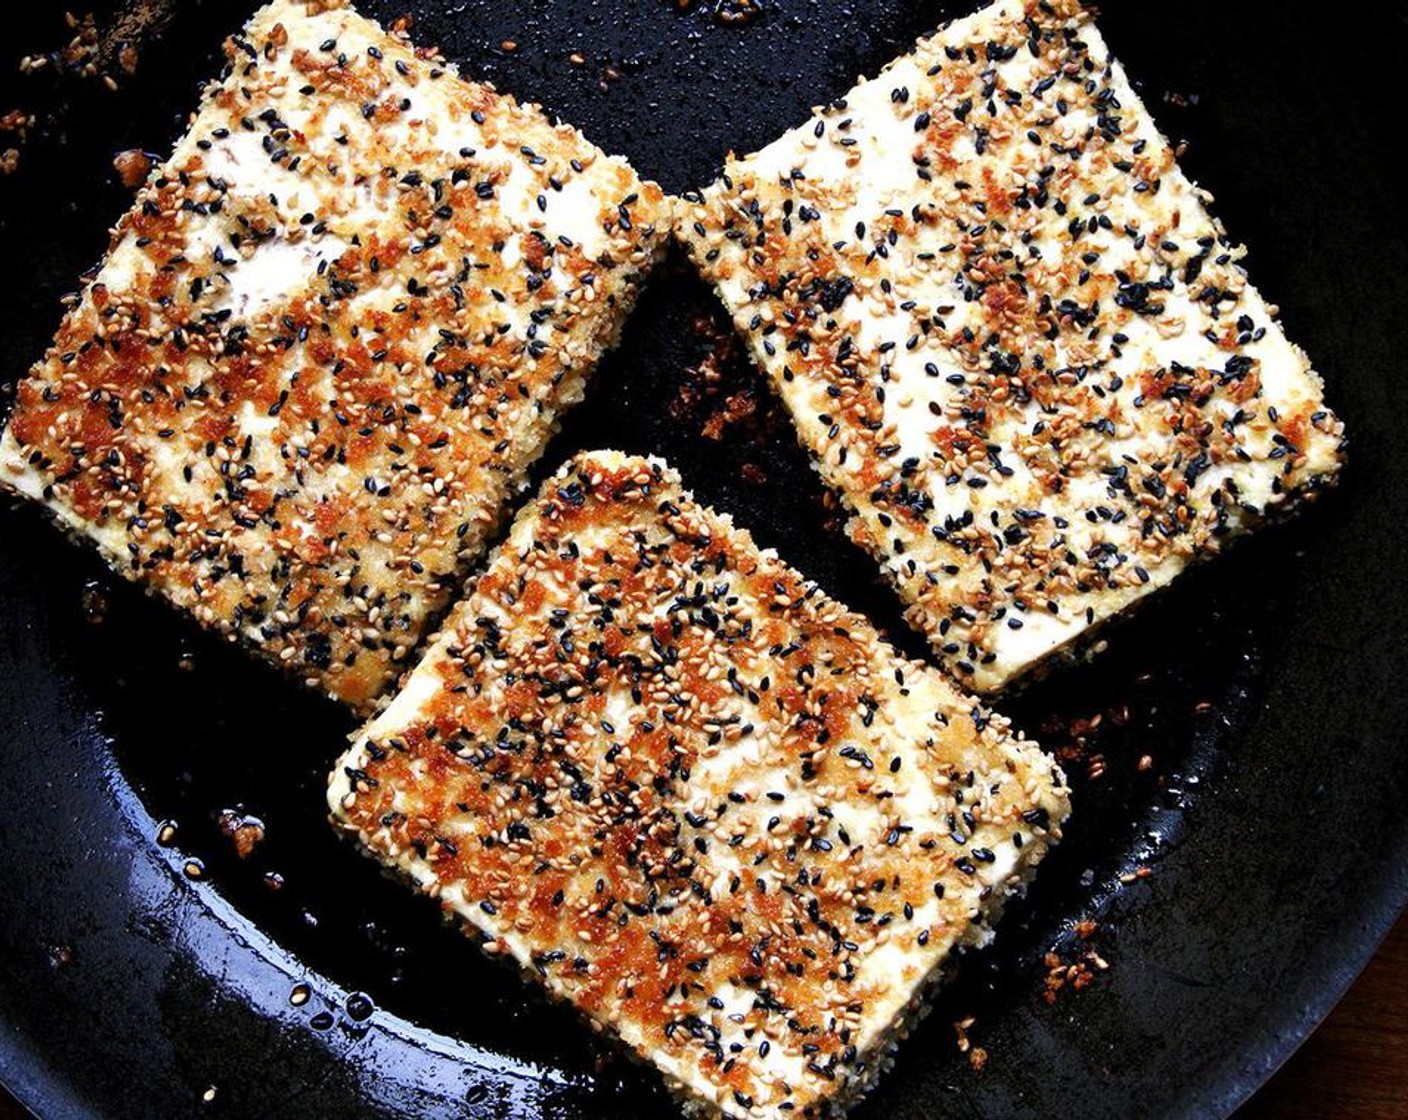 step 6 Heat a large nonstick frying pan over medium-high heat. When it’s hot, add Canola Oil (as needed). Carefully lay each piece of tofu into the frying pan. Turn the heat down to medium if the slices appear to be browning too quickly. Crisp tofu slices for about 3-4 minutes a side, then transfer to a serving platter.